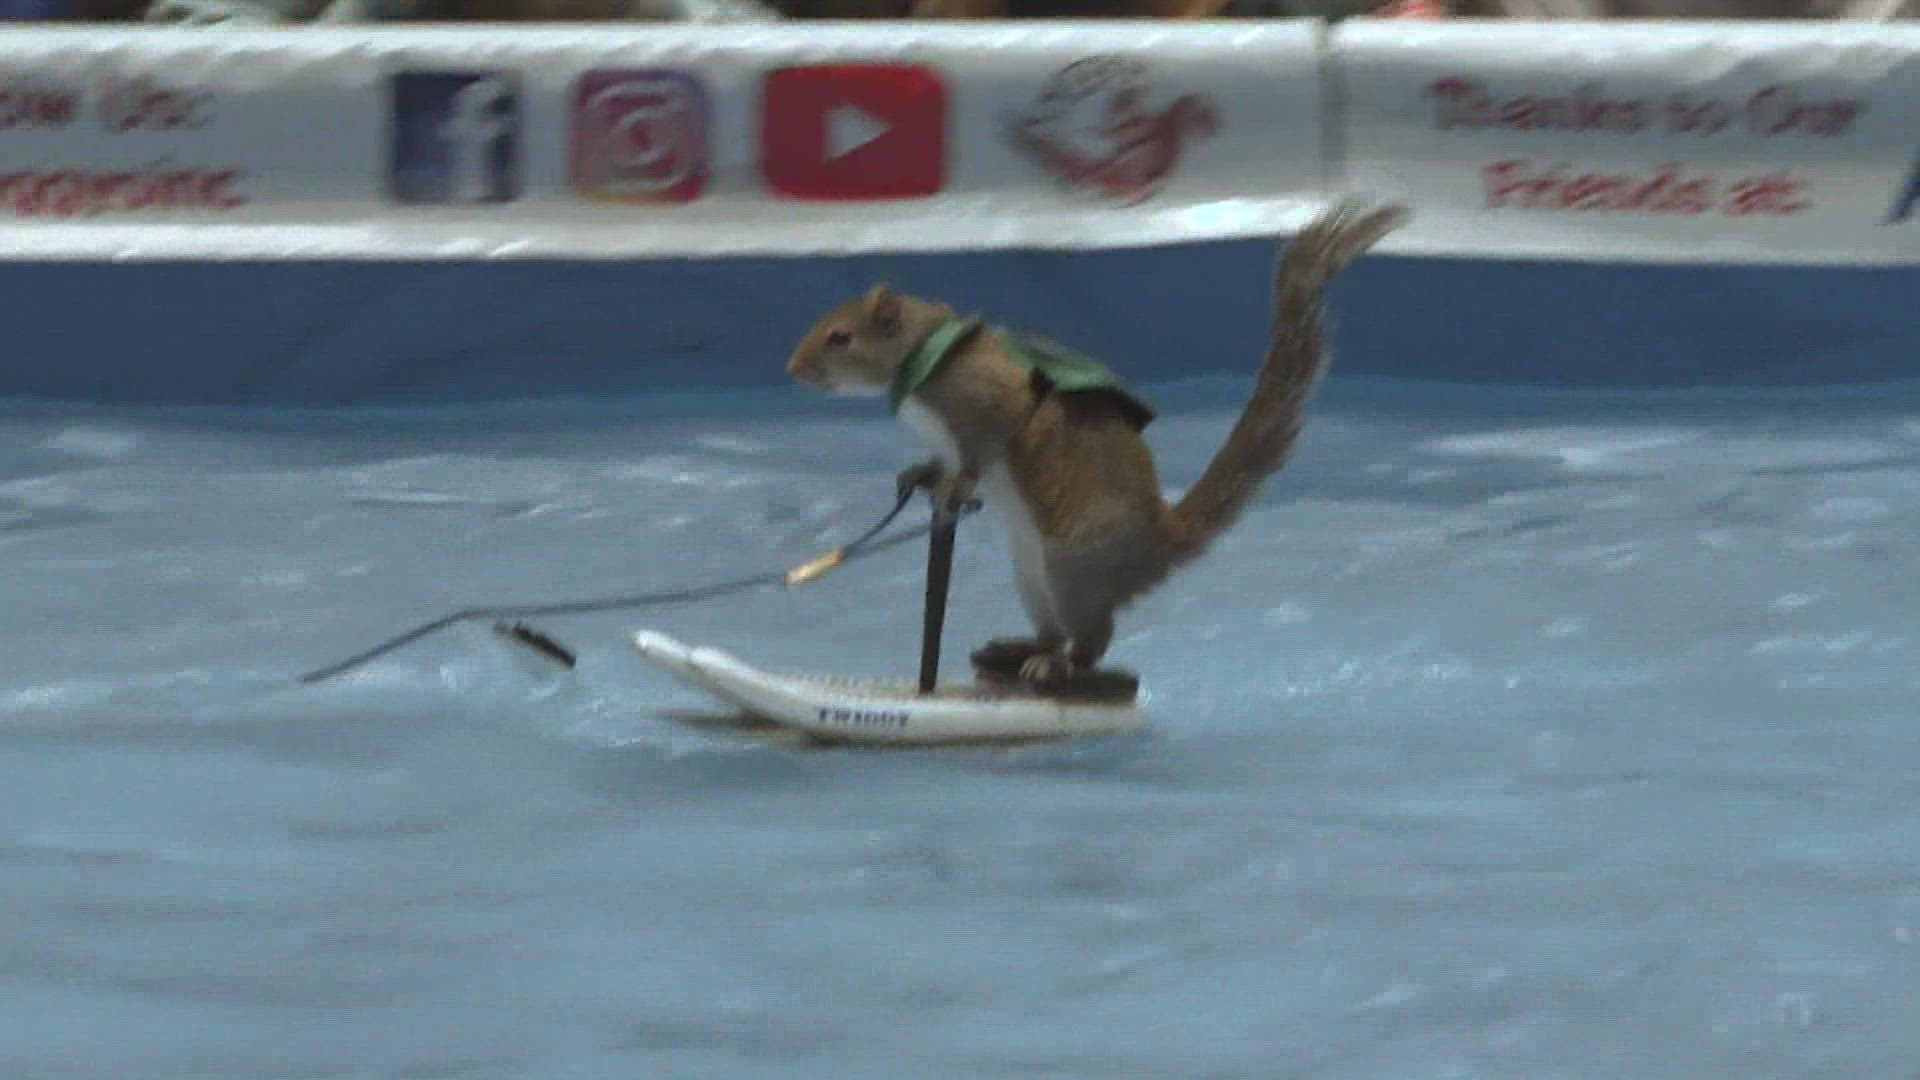 The heartbreaking story behind Twiggy, the Water Skiing Squirrel who